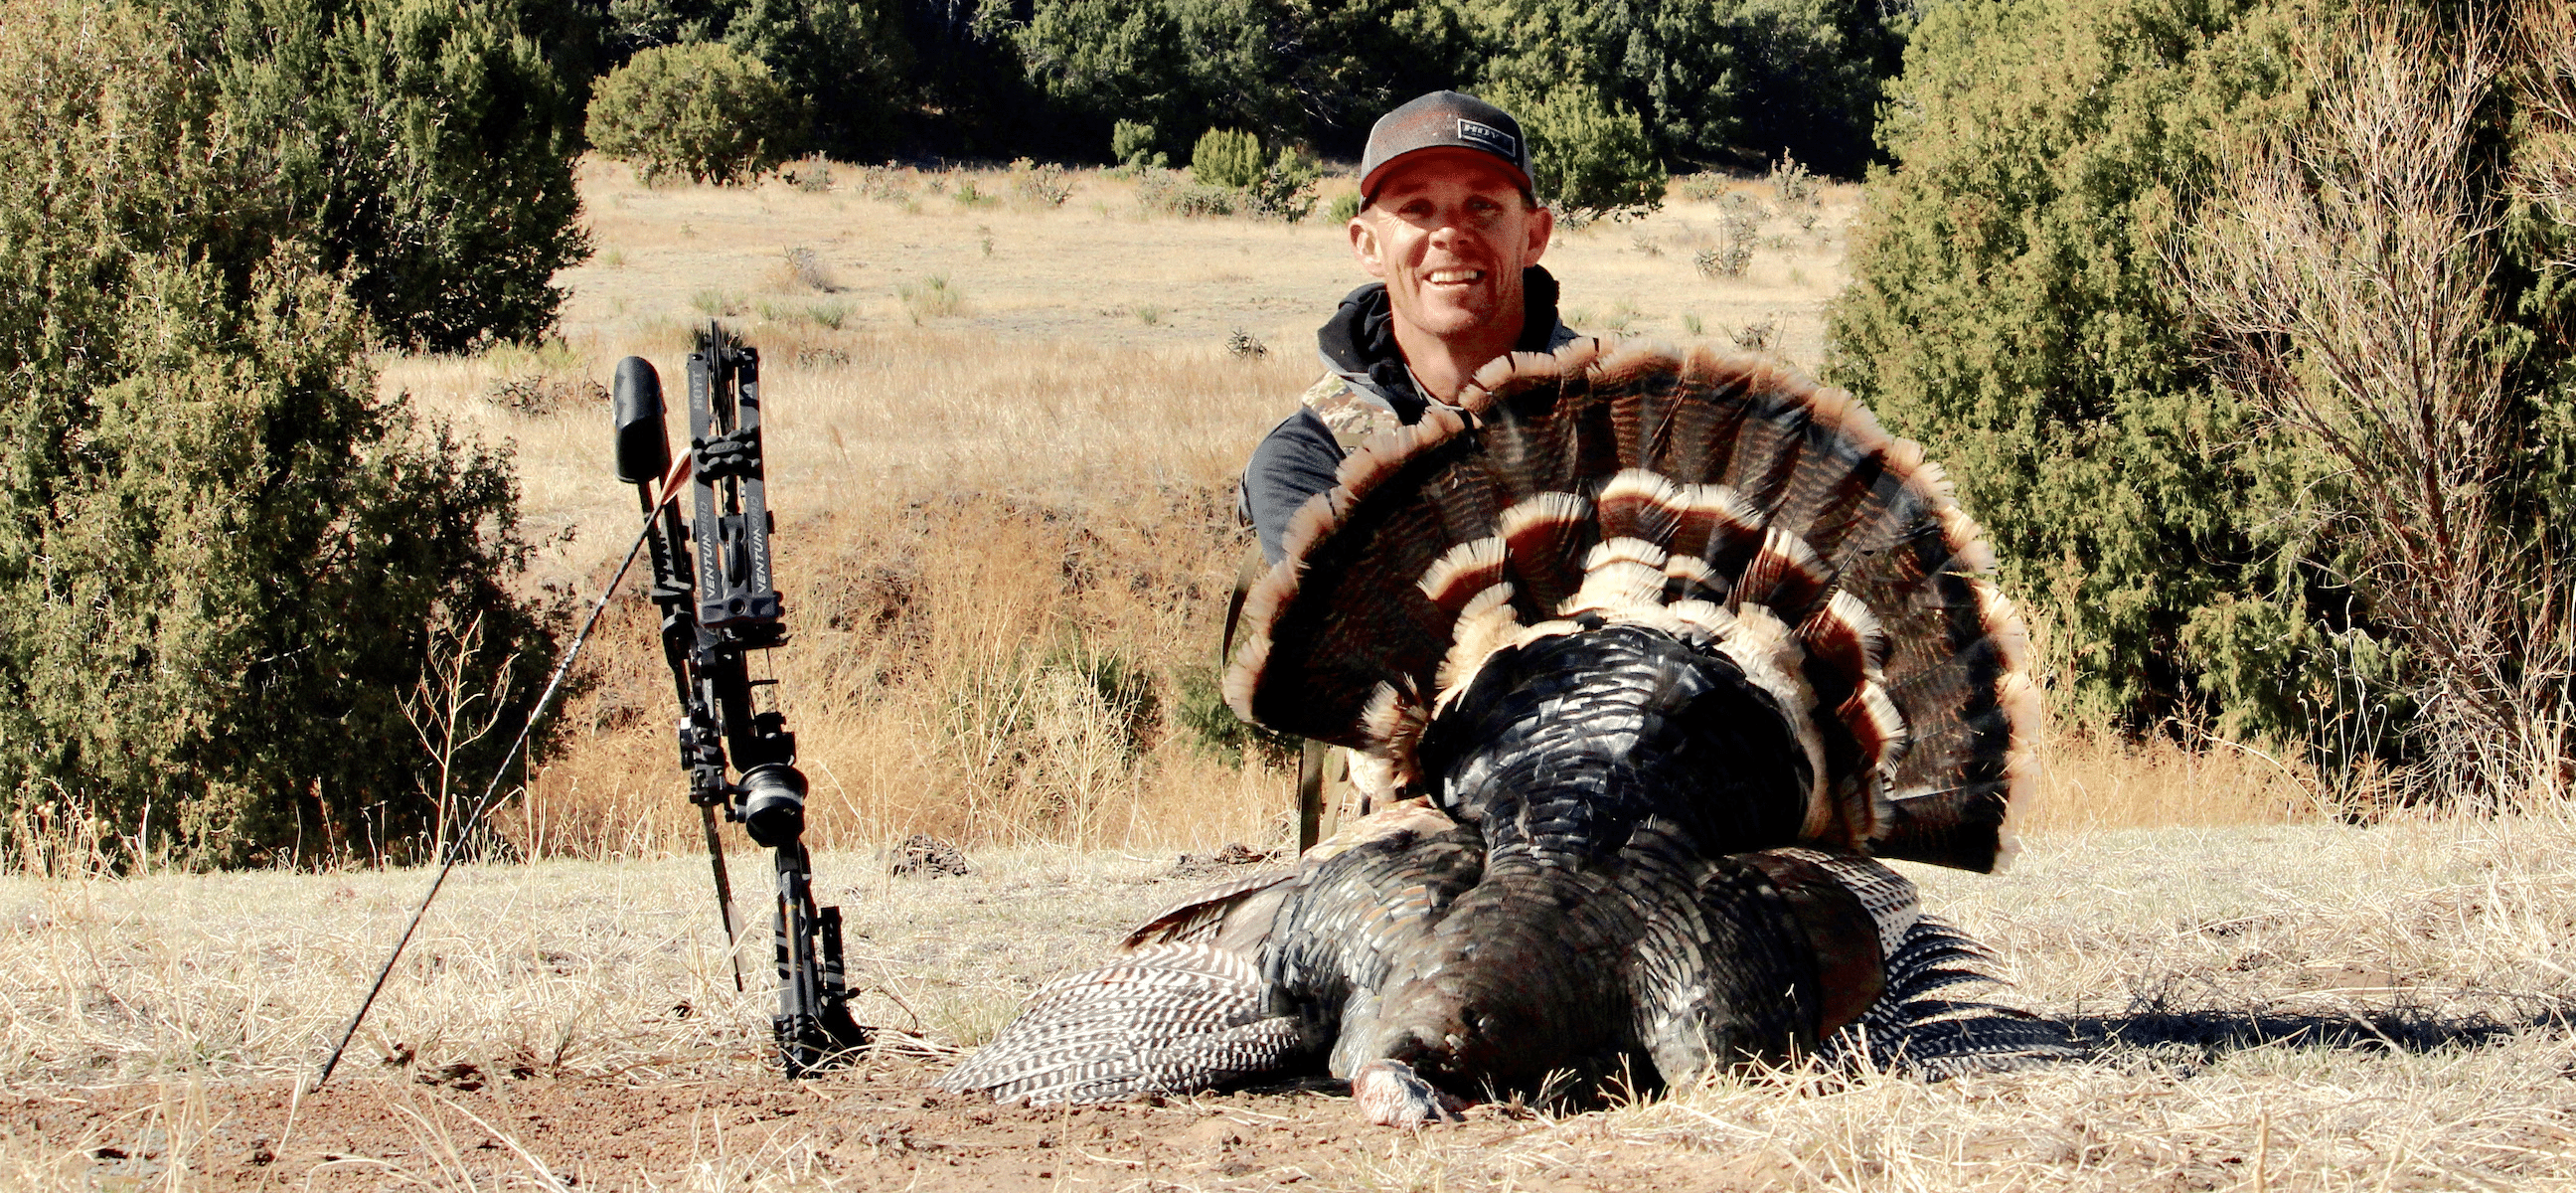 Turkey hunting the West is a must-have experience.